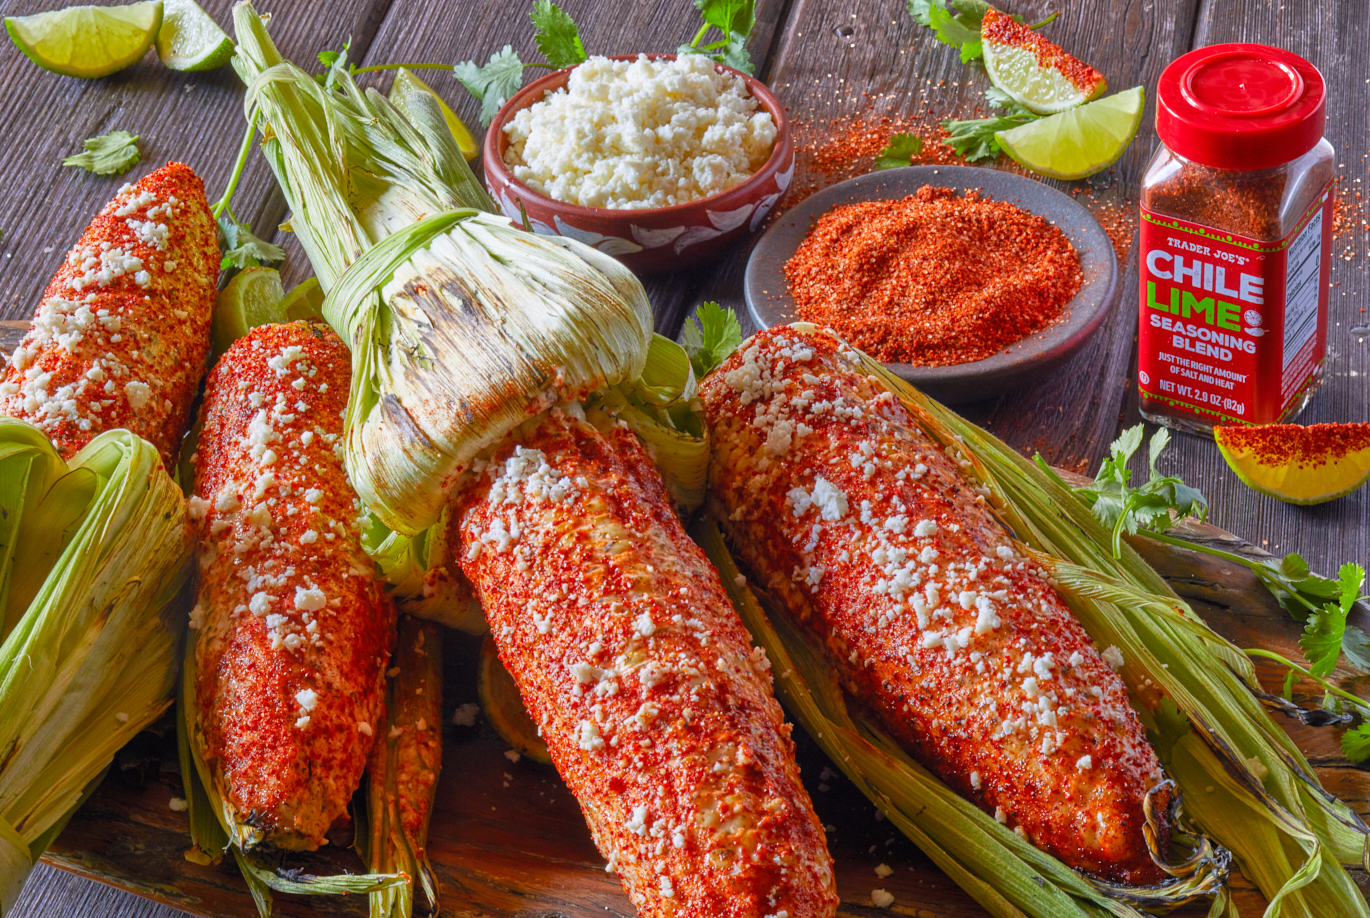 Trader Joe's Chile Lime Seasoning Blend; shown as elote - grilled corn on the cob with mayonnaise, cotija cheese and lime and cilantro